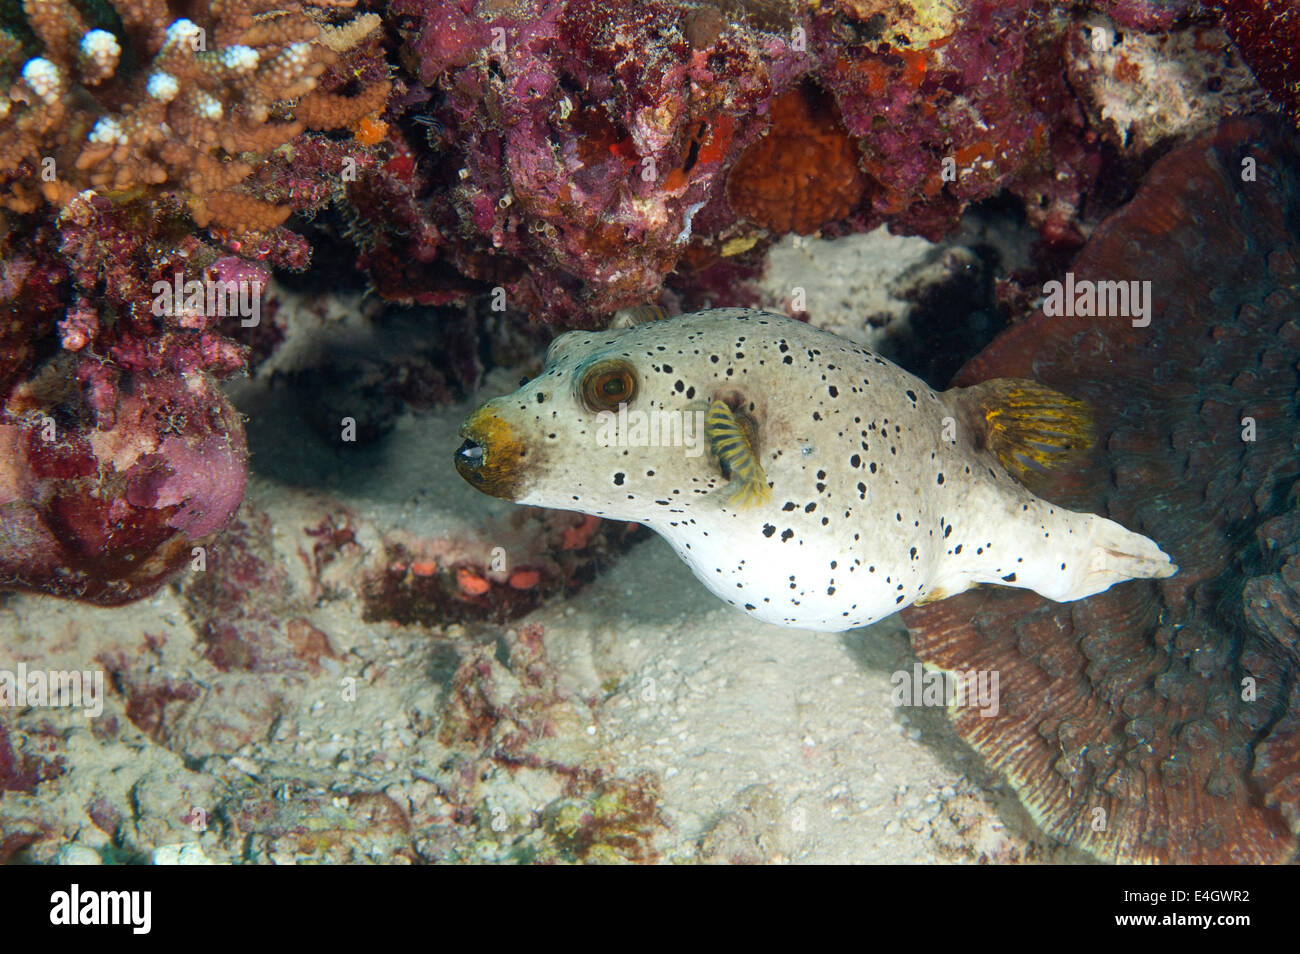 Black-spotted poisson-globe Banque D'Images